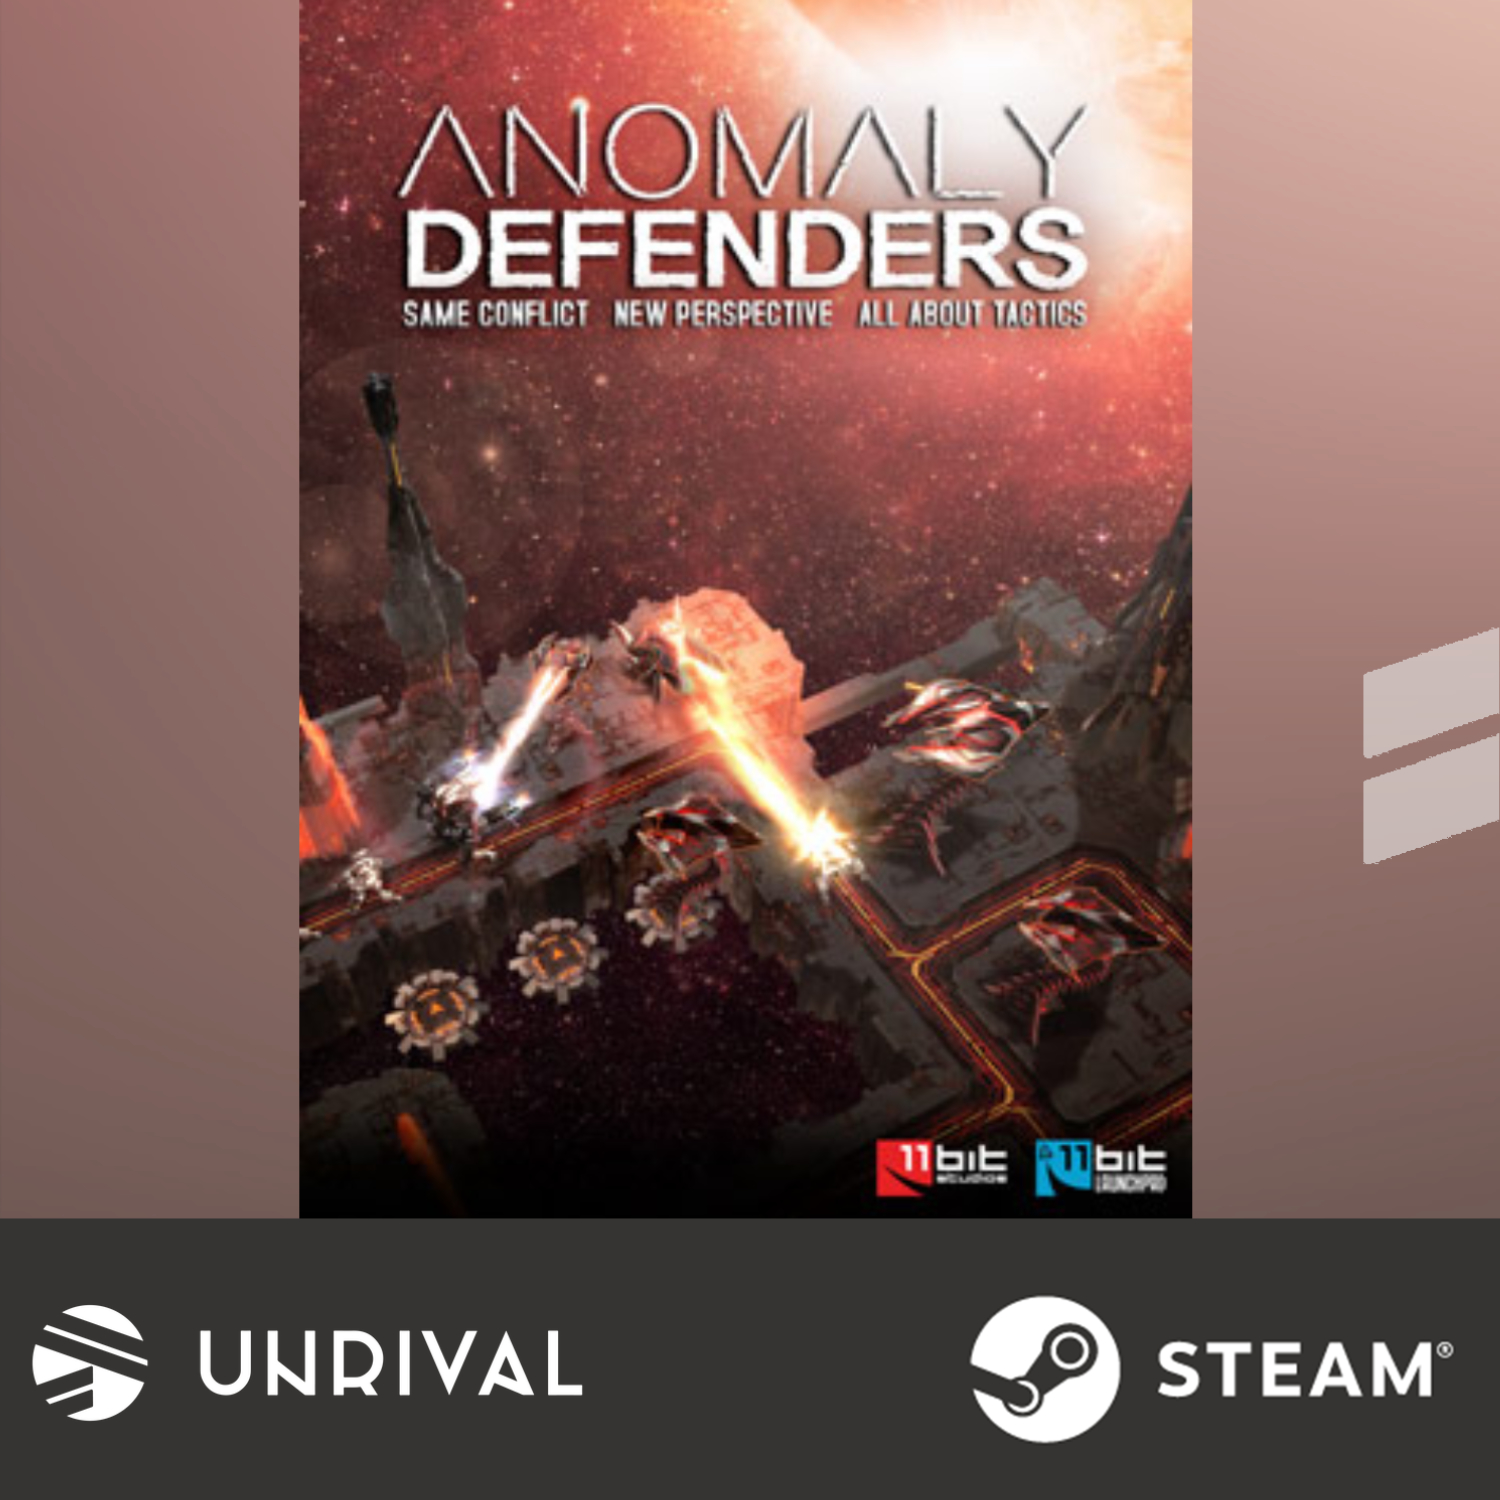 [Hot Sale] Anomaly Defenders PC Digital Download Game (Single Player) - Unrival